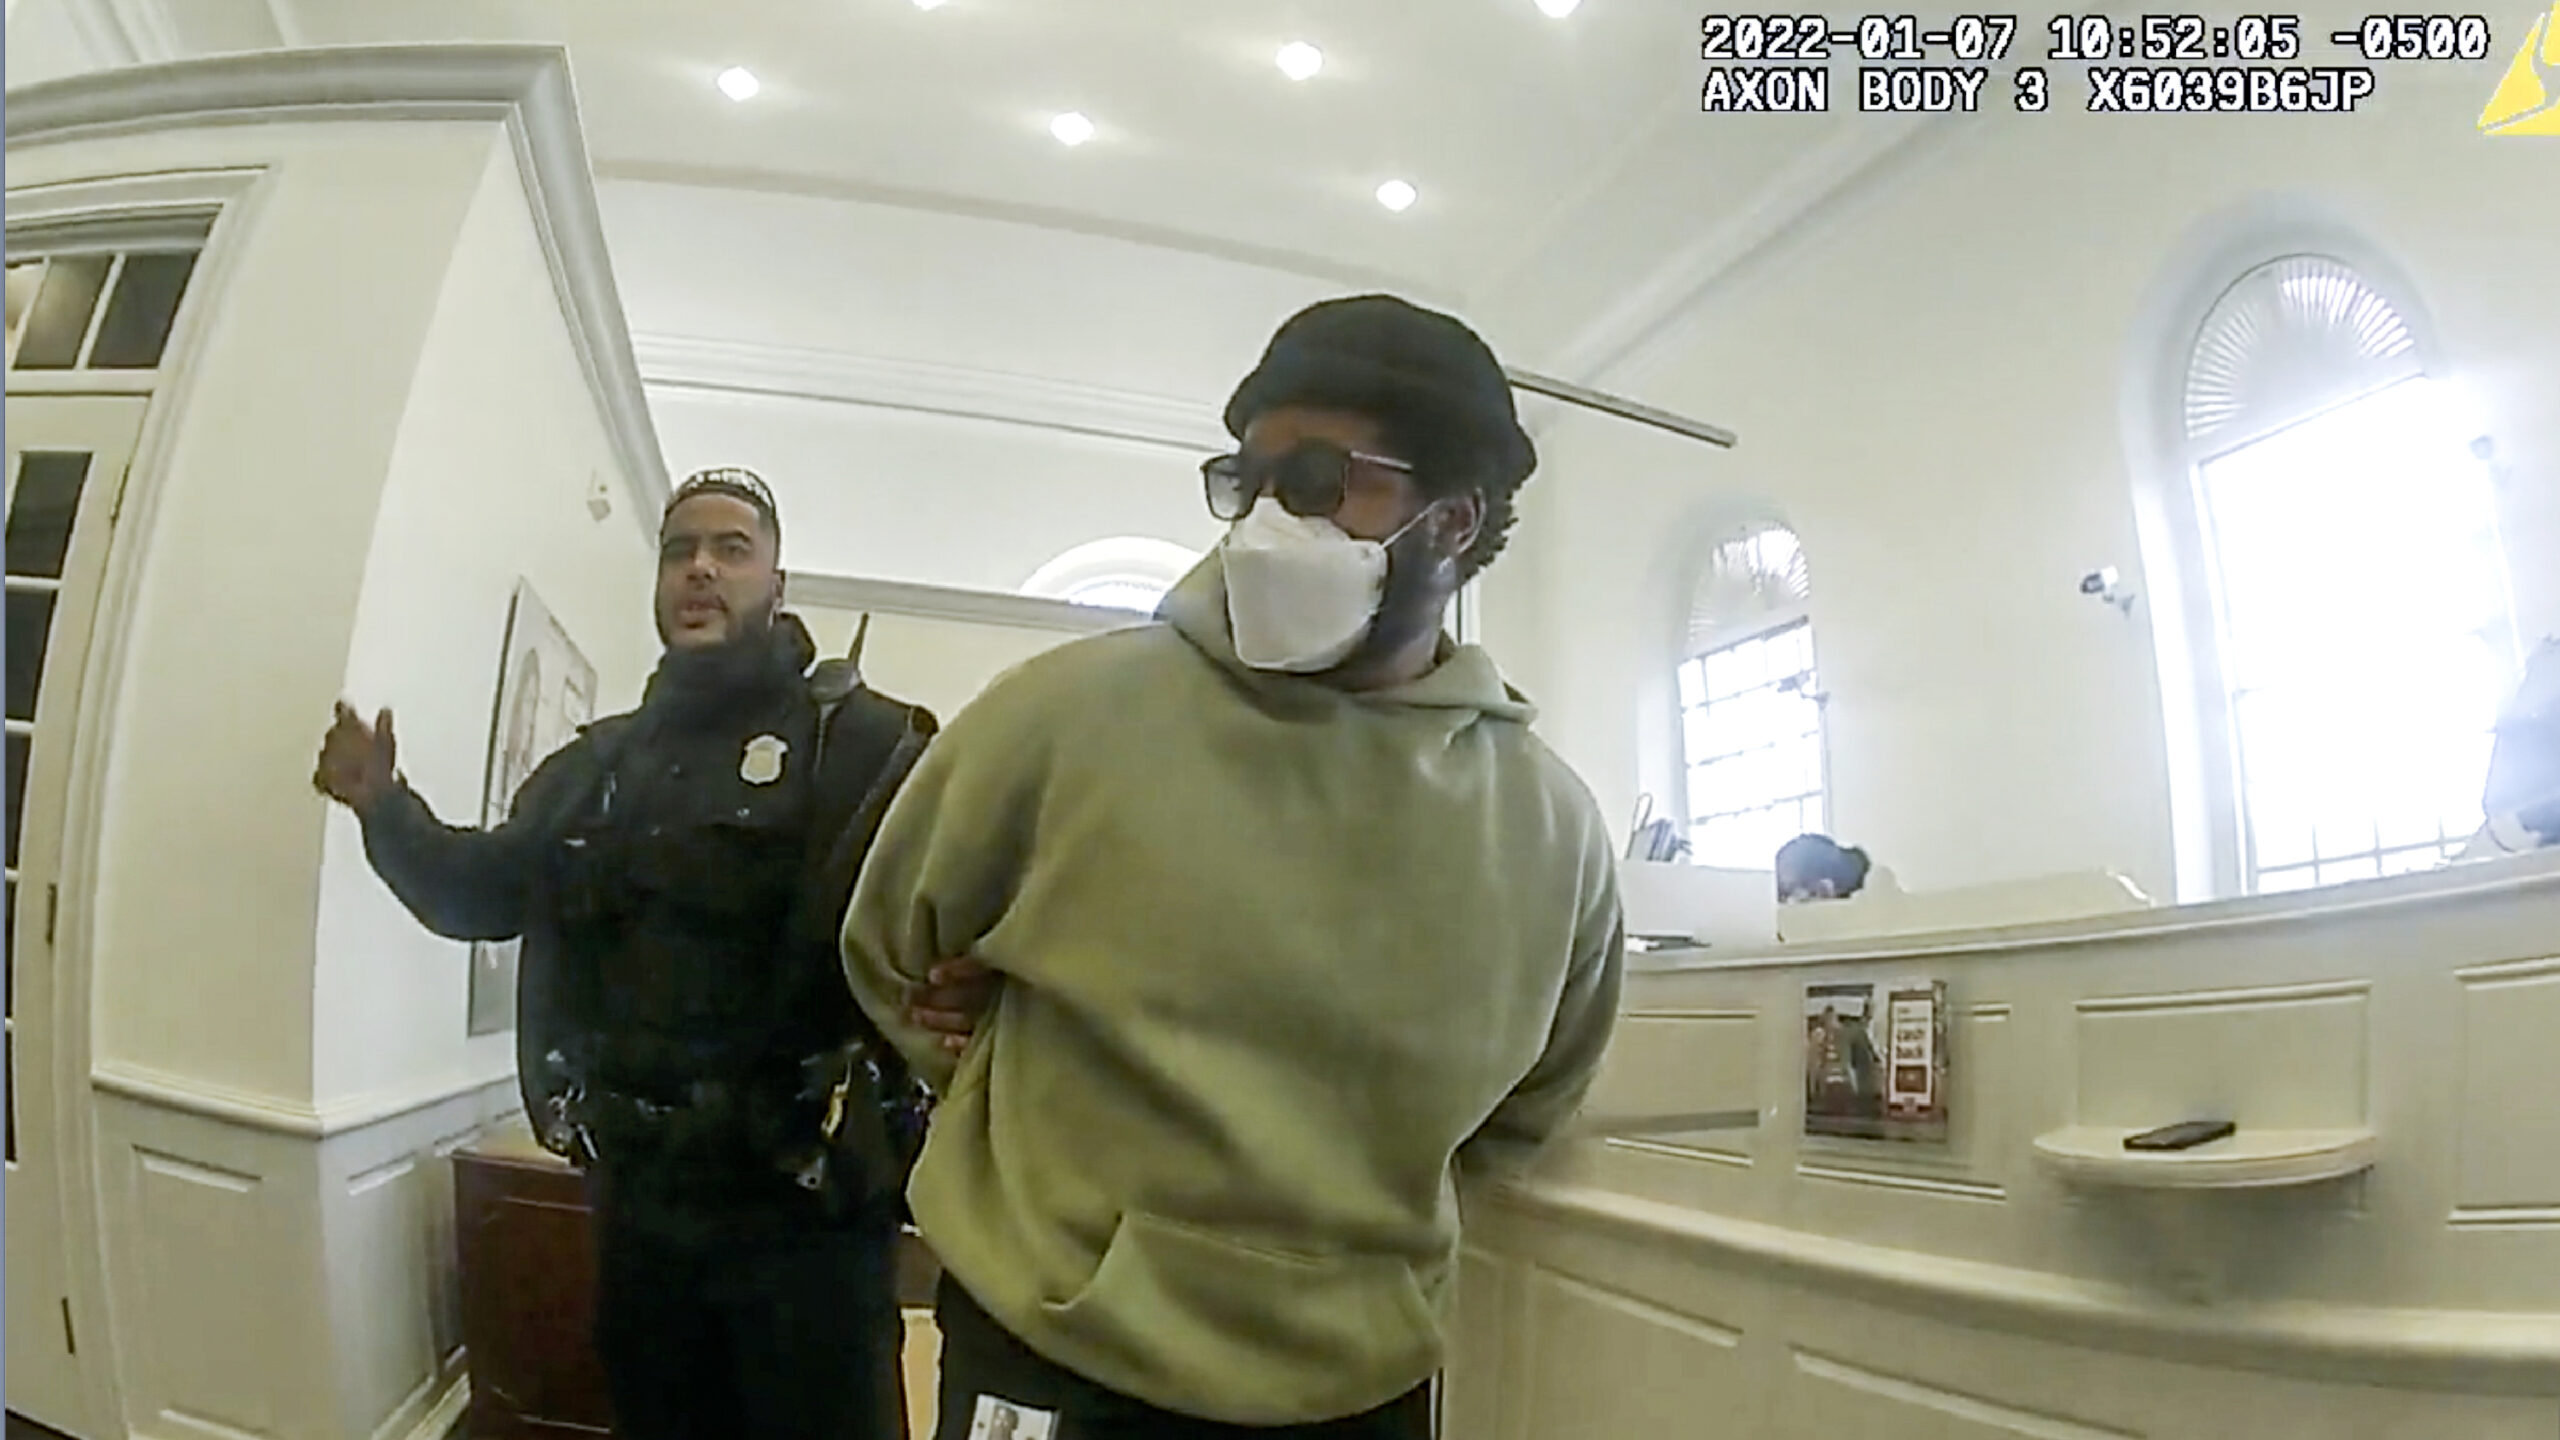 A police officer detains "Black Panther" director Ryan Coogler at a Bank of America branch in Atlanta, in this January 2022 image made from Atlanta Police video. Coogler was mistaken for a bank robber at the bank. (Atlanta Police Department via AP)